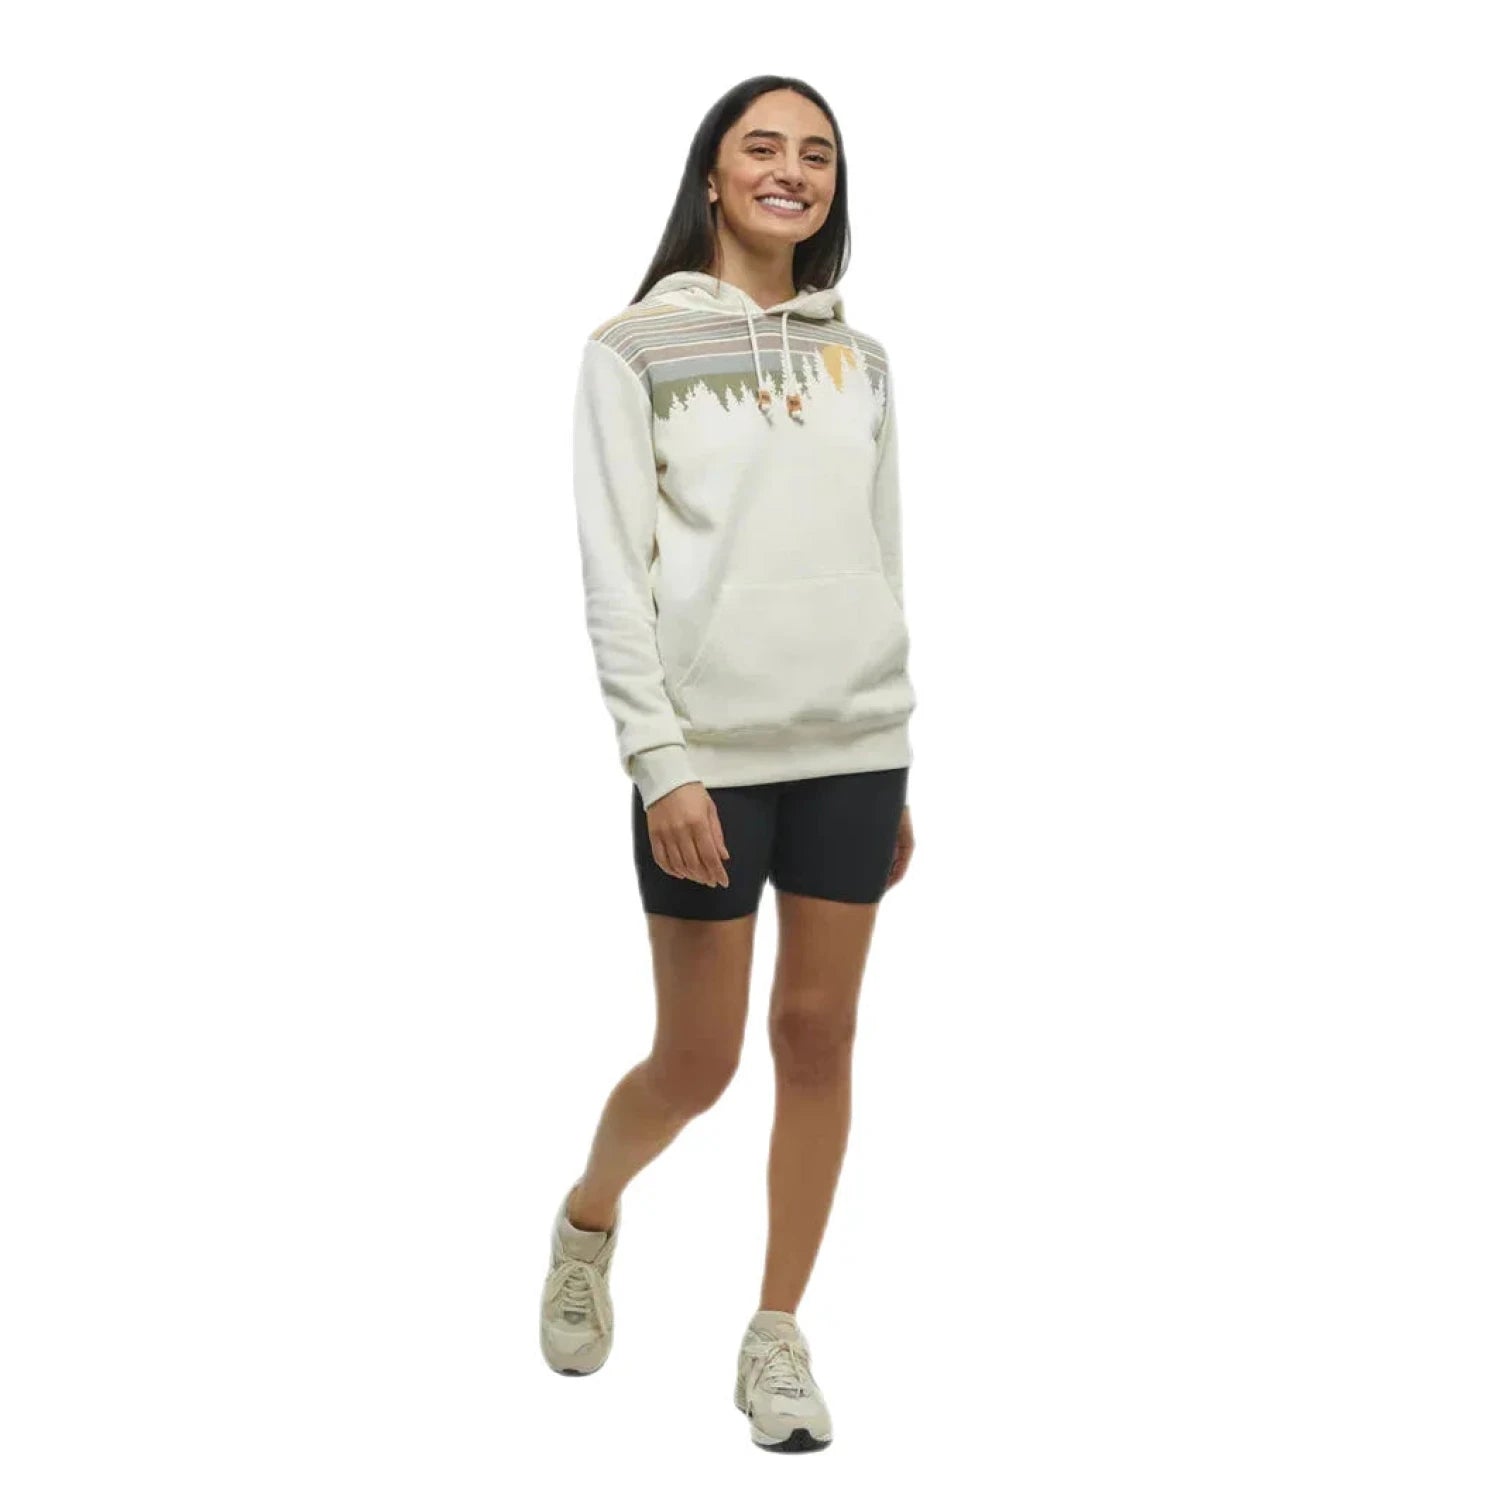 Tentree Women's Retro Juniper Classic Hoodie shown in the Undyed Driftwood color option. Front view. shown on model.